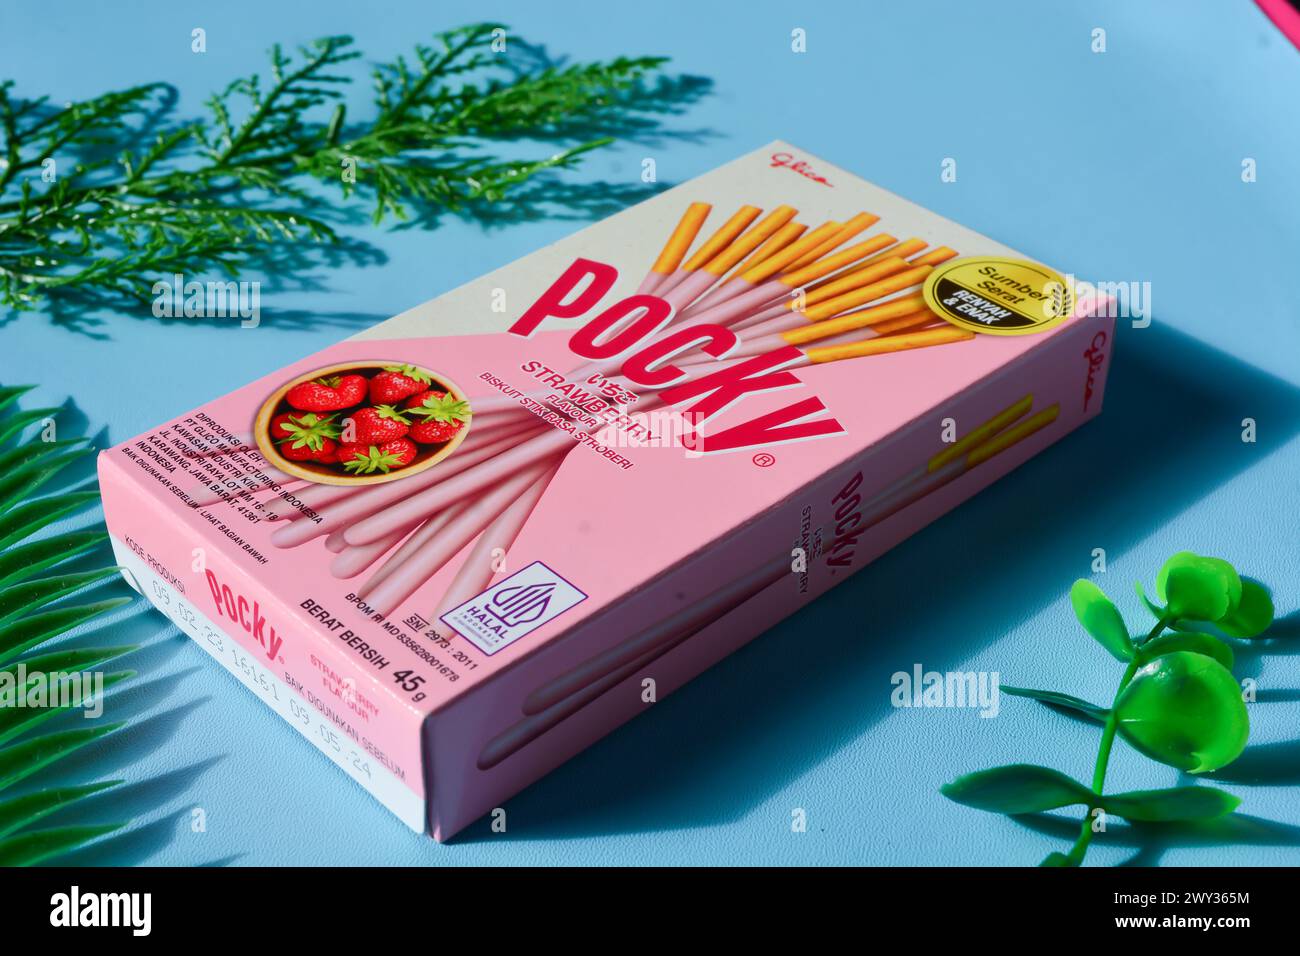 Wonosobo, Indonesia April 23, 2023: Pocky snacks with strawberry flavor in pink packaging. Against a blue background. Stock Photo